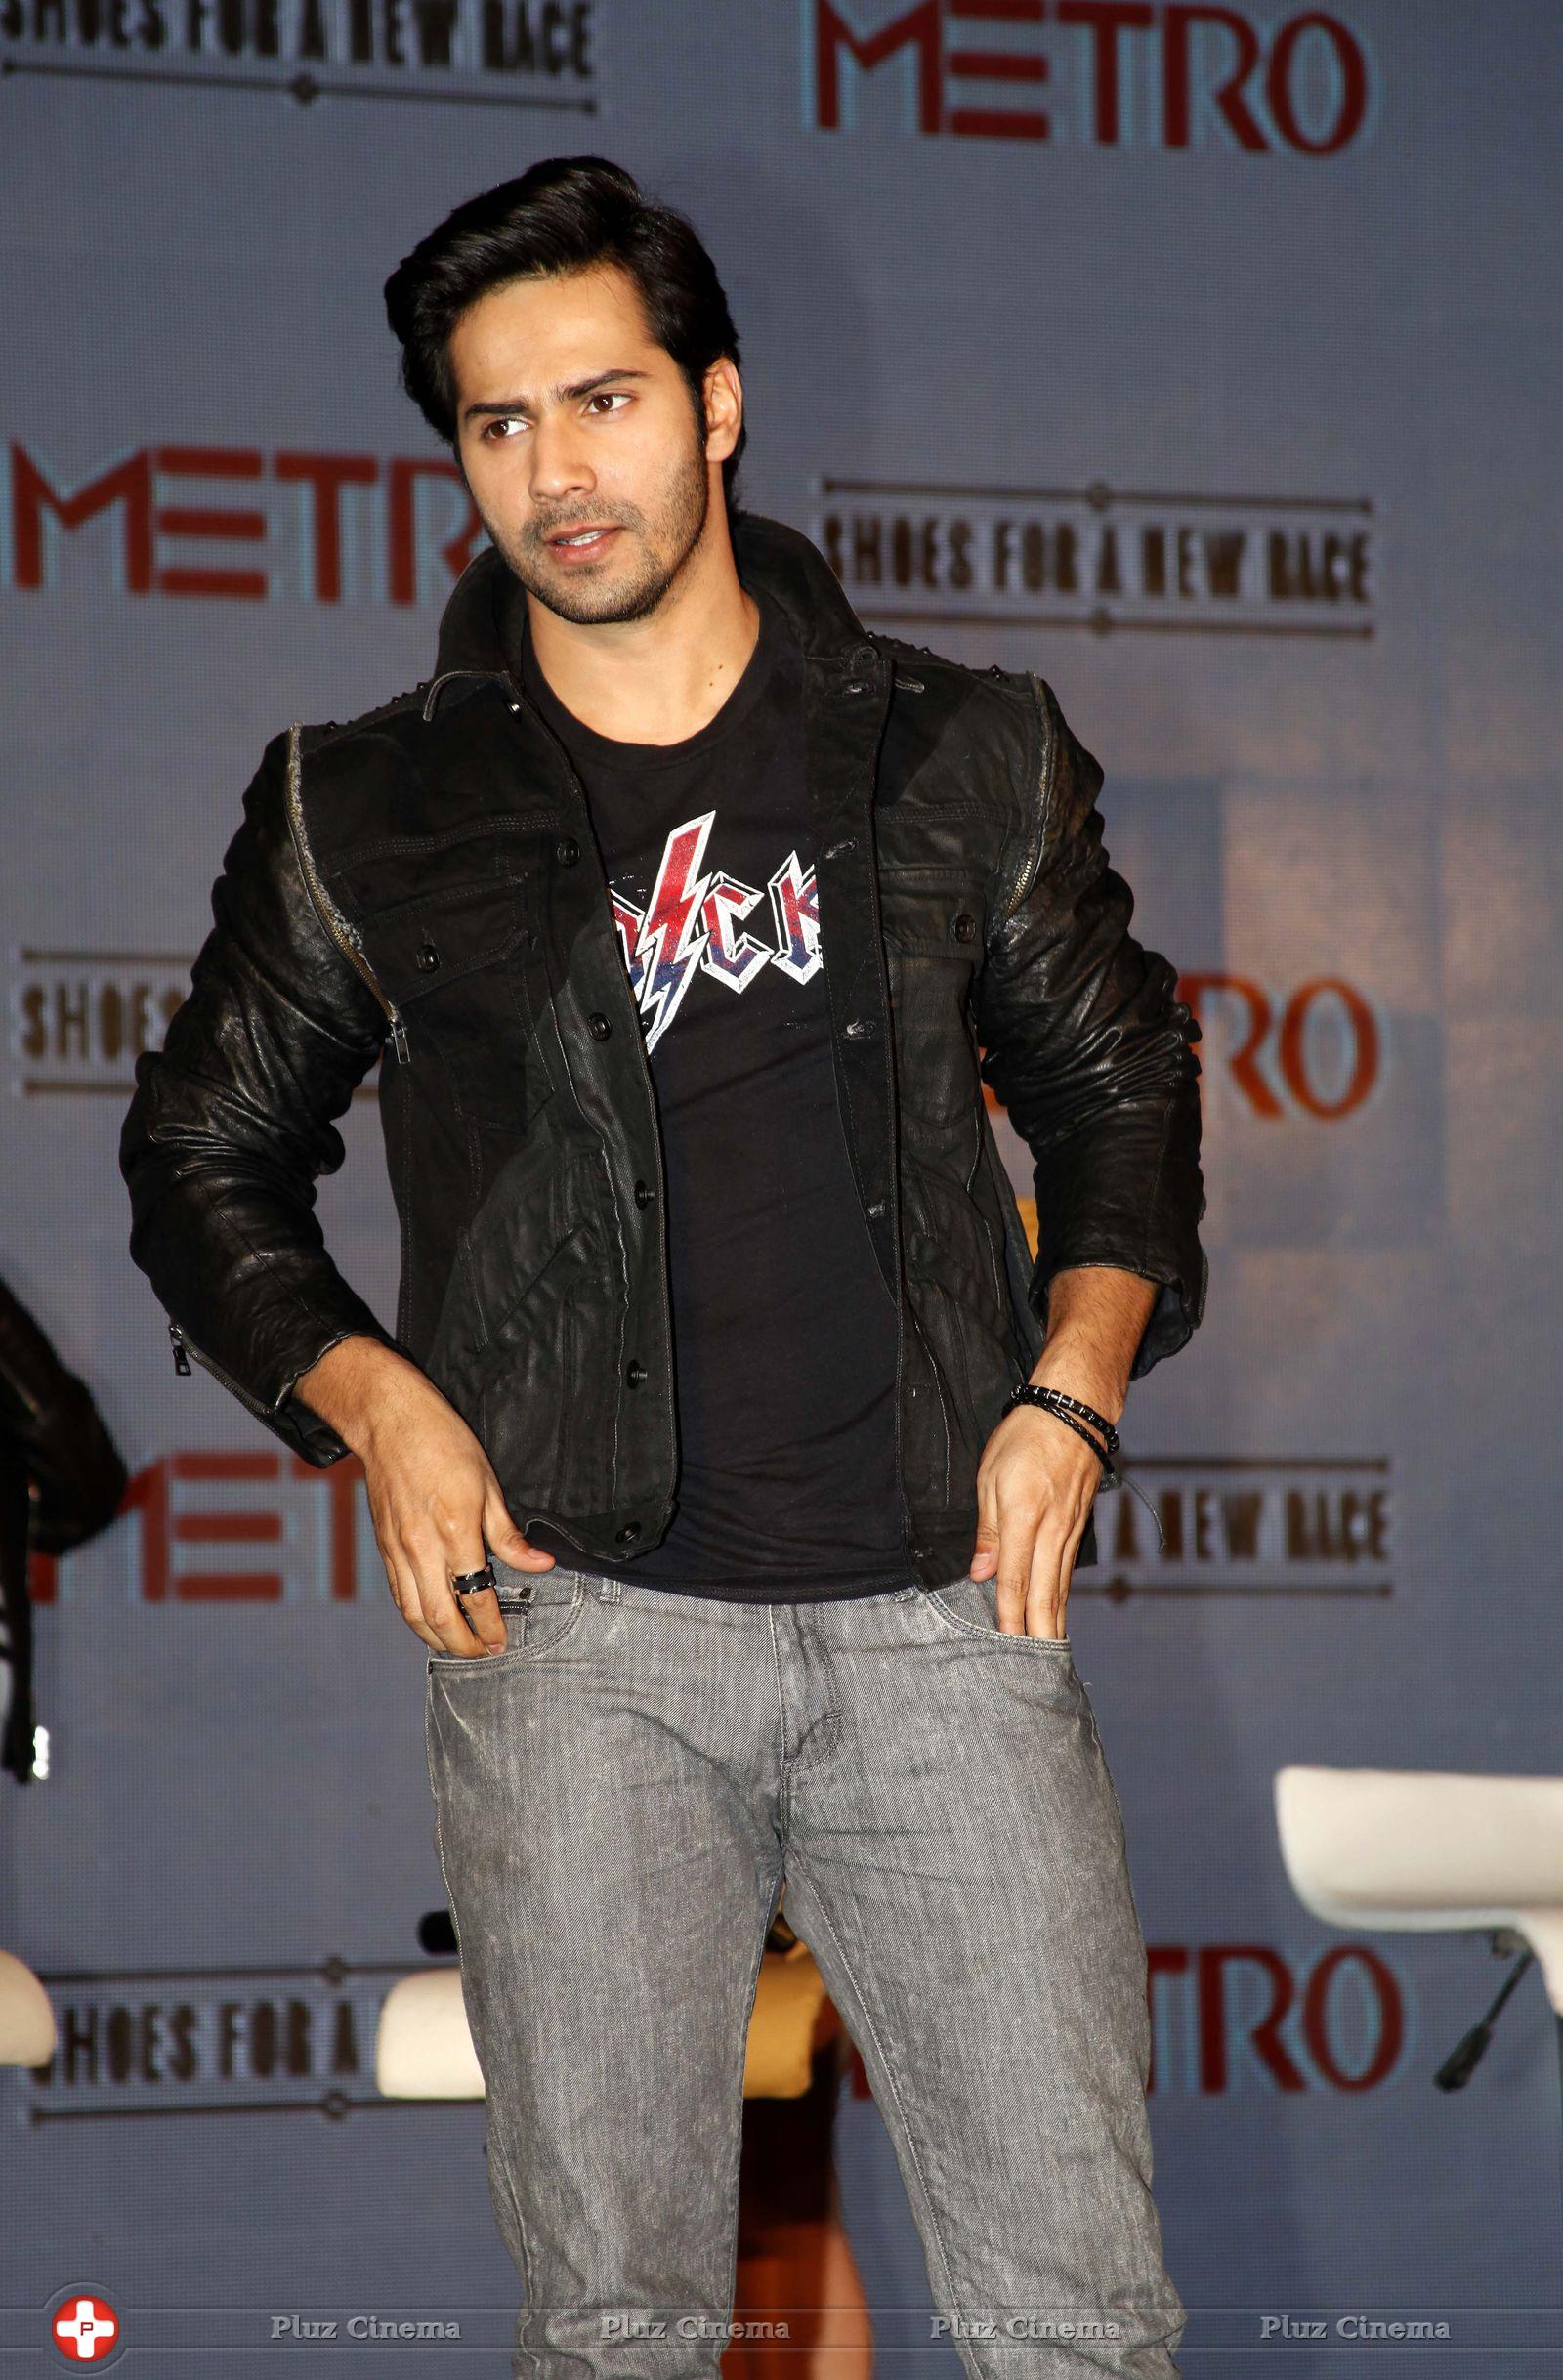 Varun Dhawan - Launch of Metro shoes campaign Shoes for a New Race Photos | Picture 671500